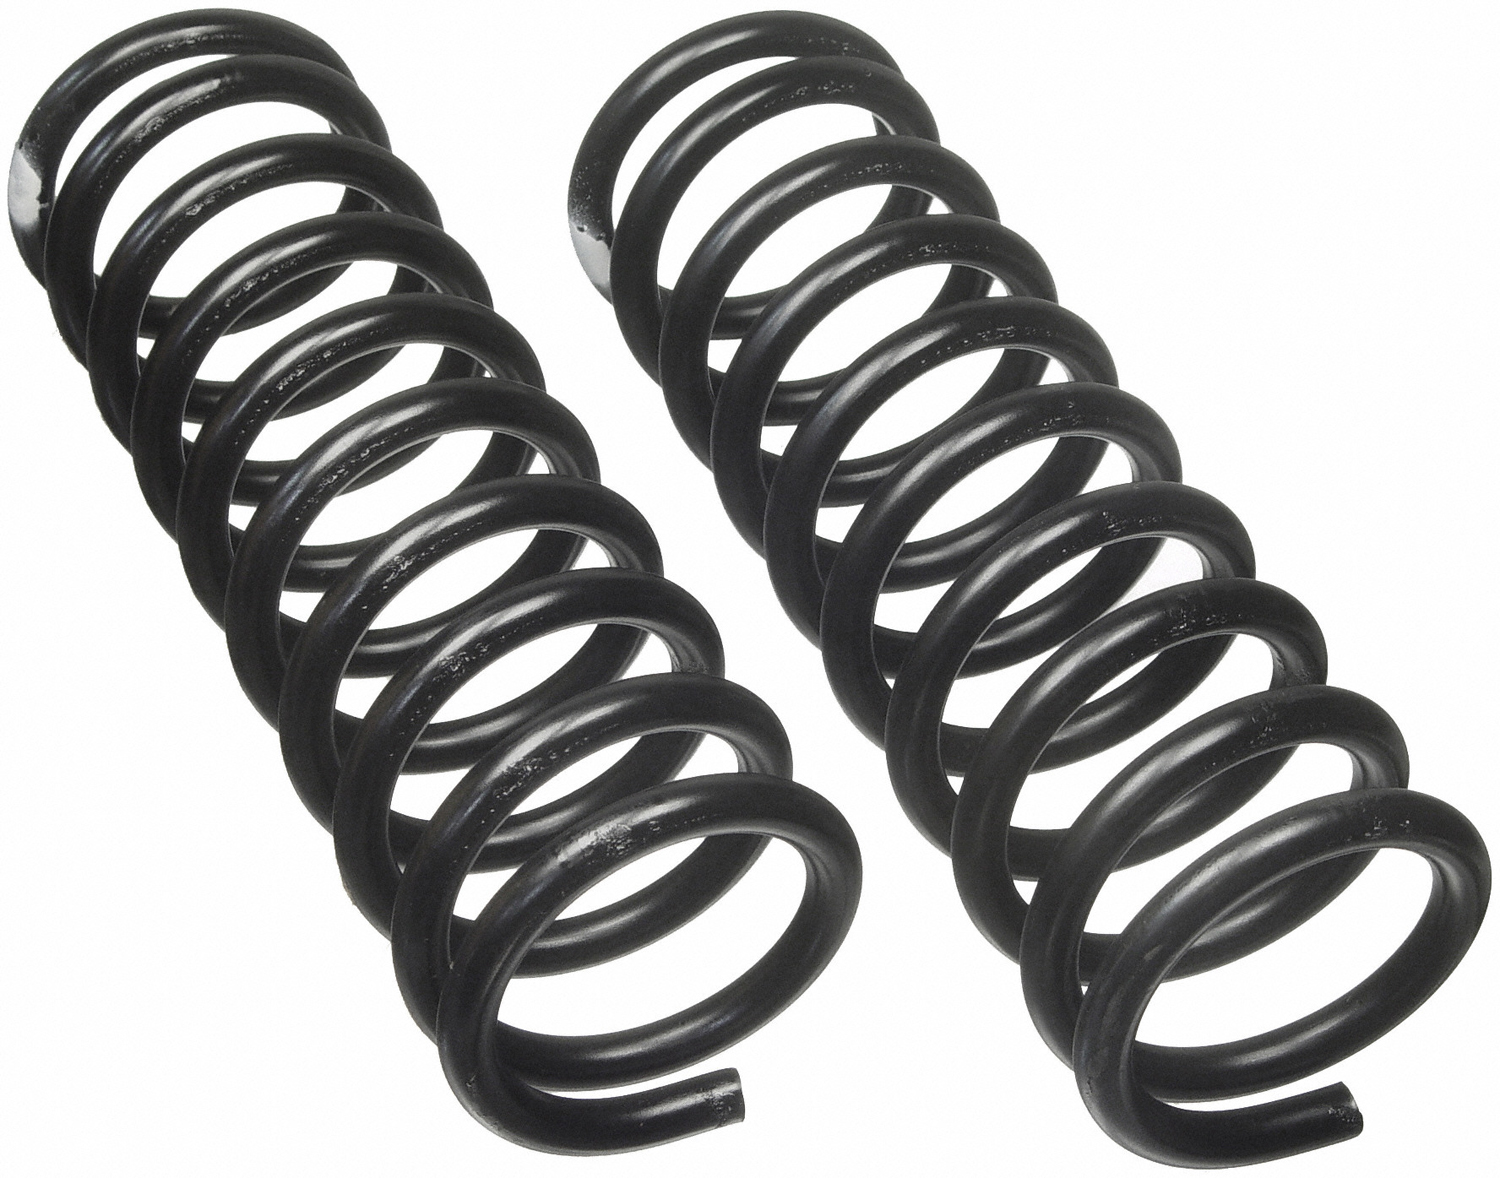 Image of ID 5006 Moog 5006 Coil Spring Set Fits 1982-1988 Buick LeSabre